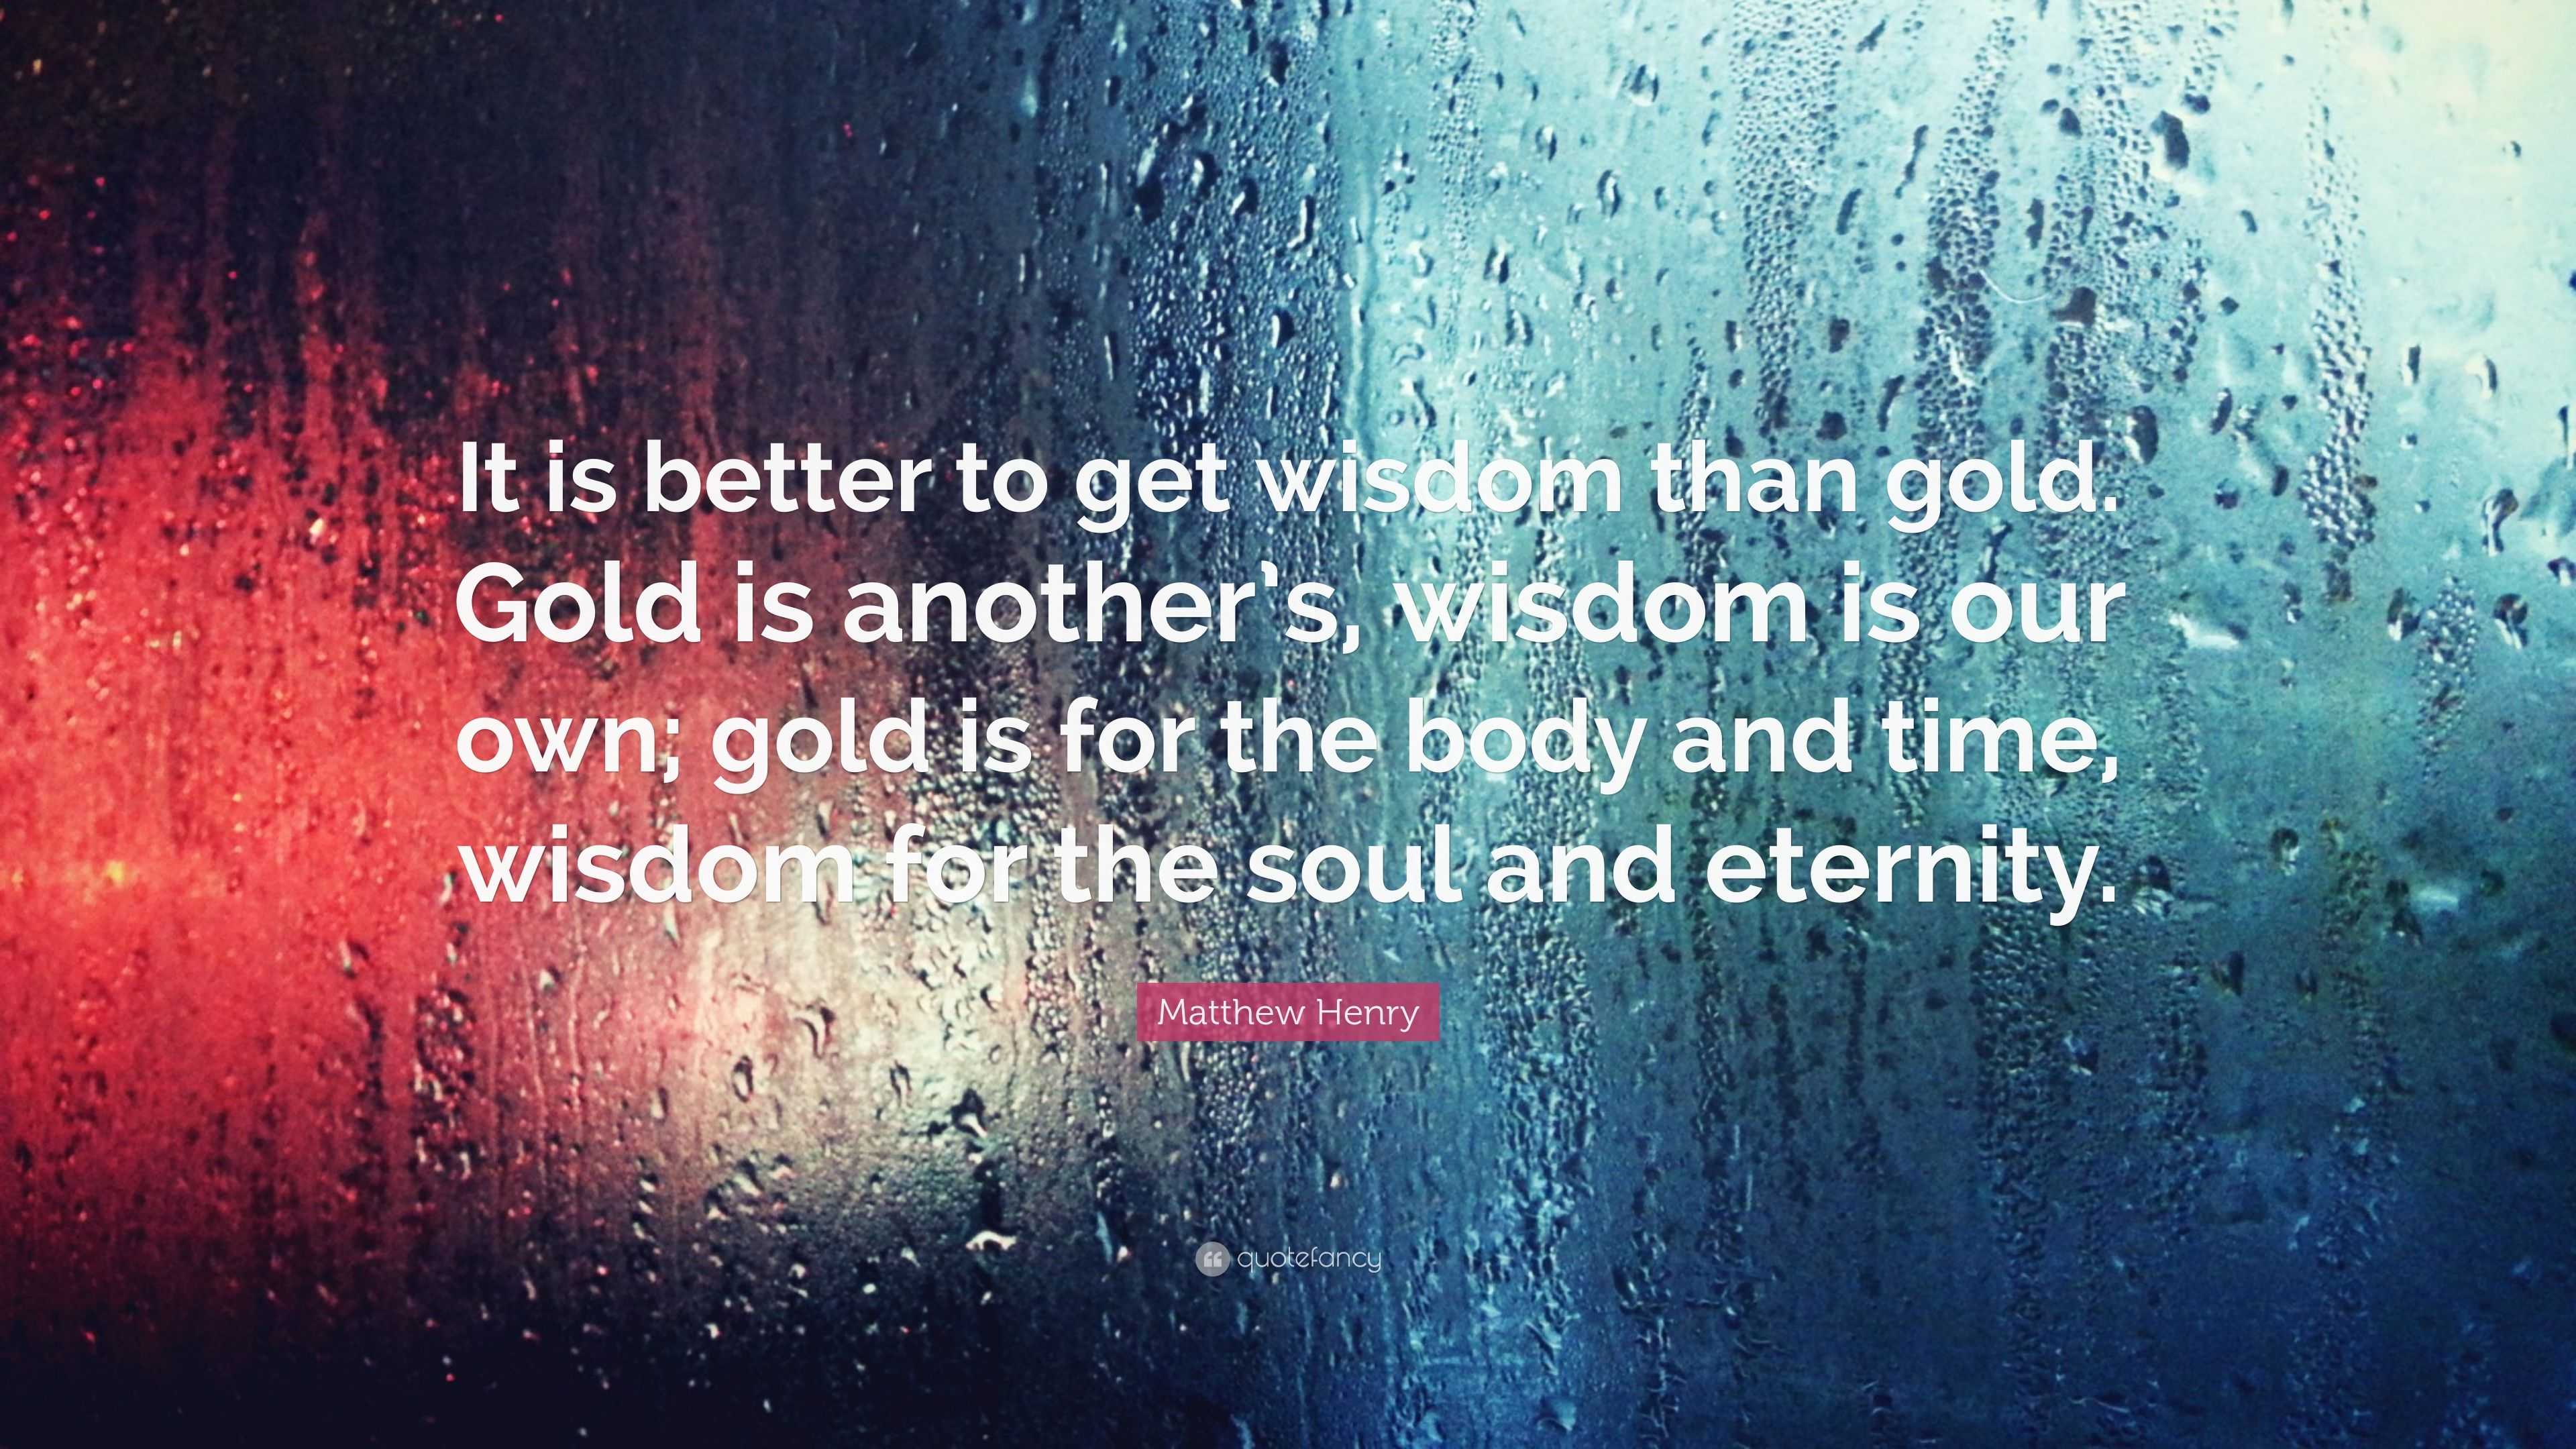 Matthew Henry Quote: “It is better to get wisdom than gold. Gold